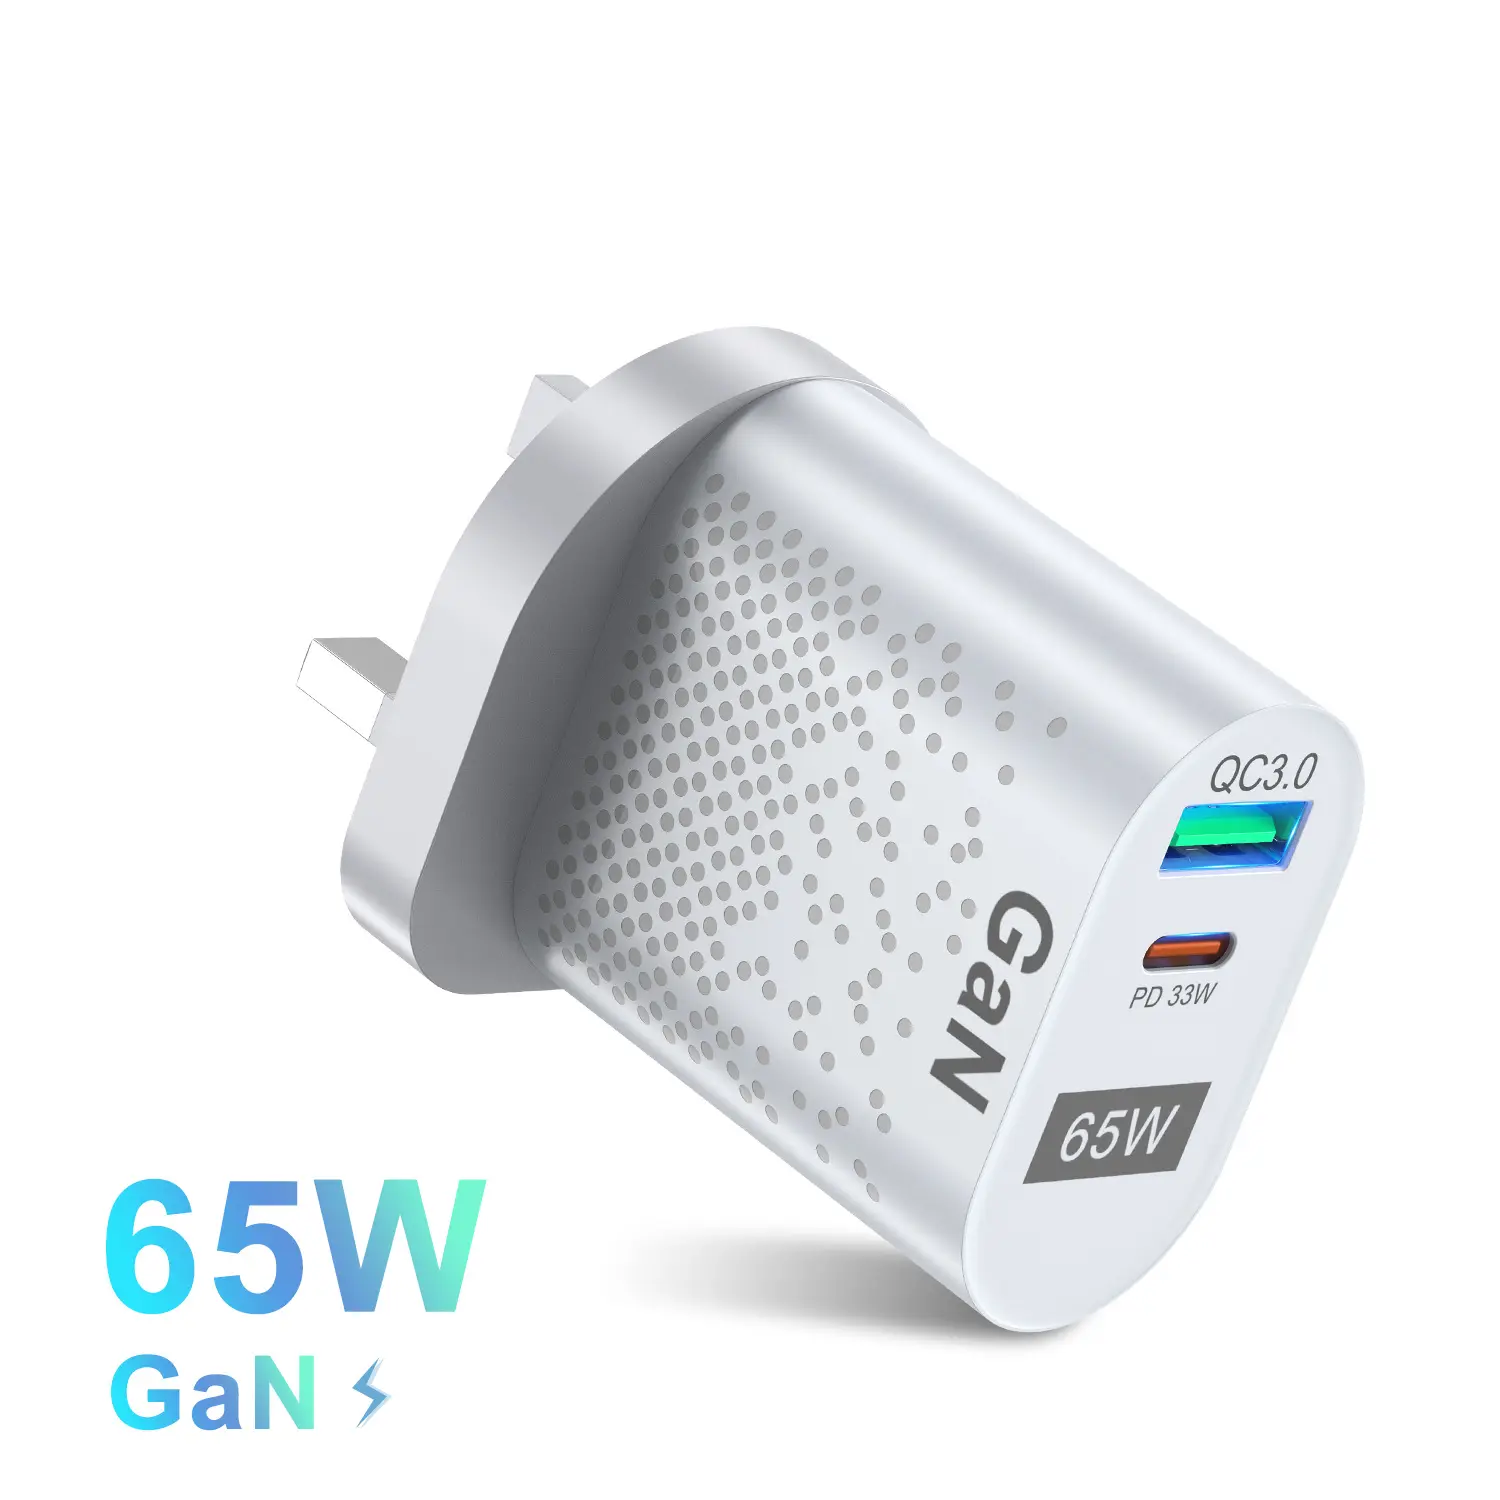 65W GaN Charger Fast Charger Type C PD Quick Chargers US EU UK AU Korean Specification Plugs Adapter For iPhone Samsung